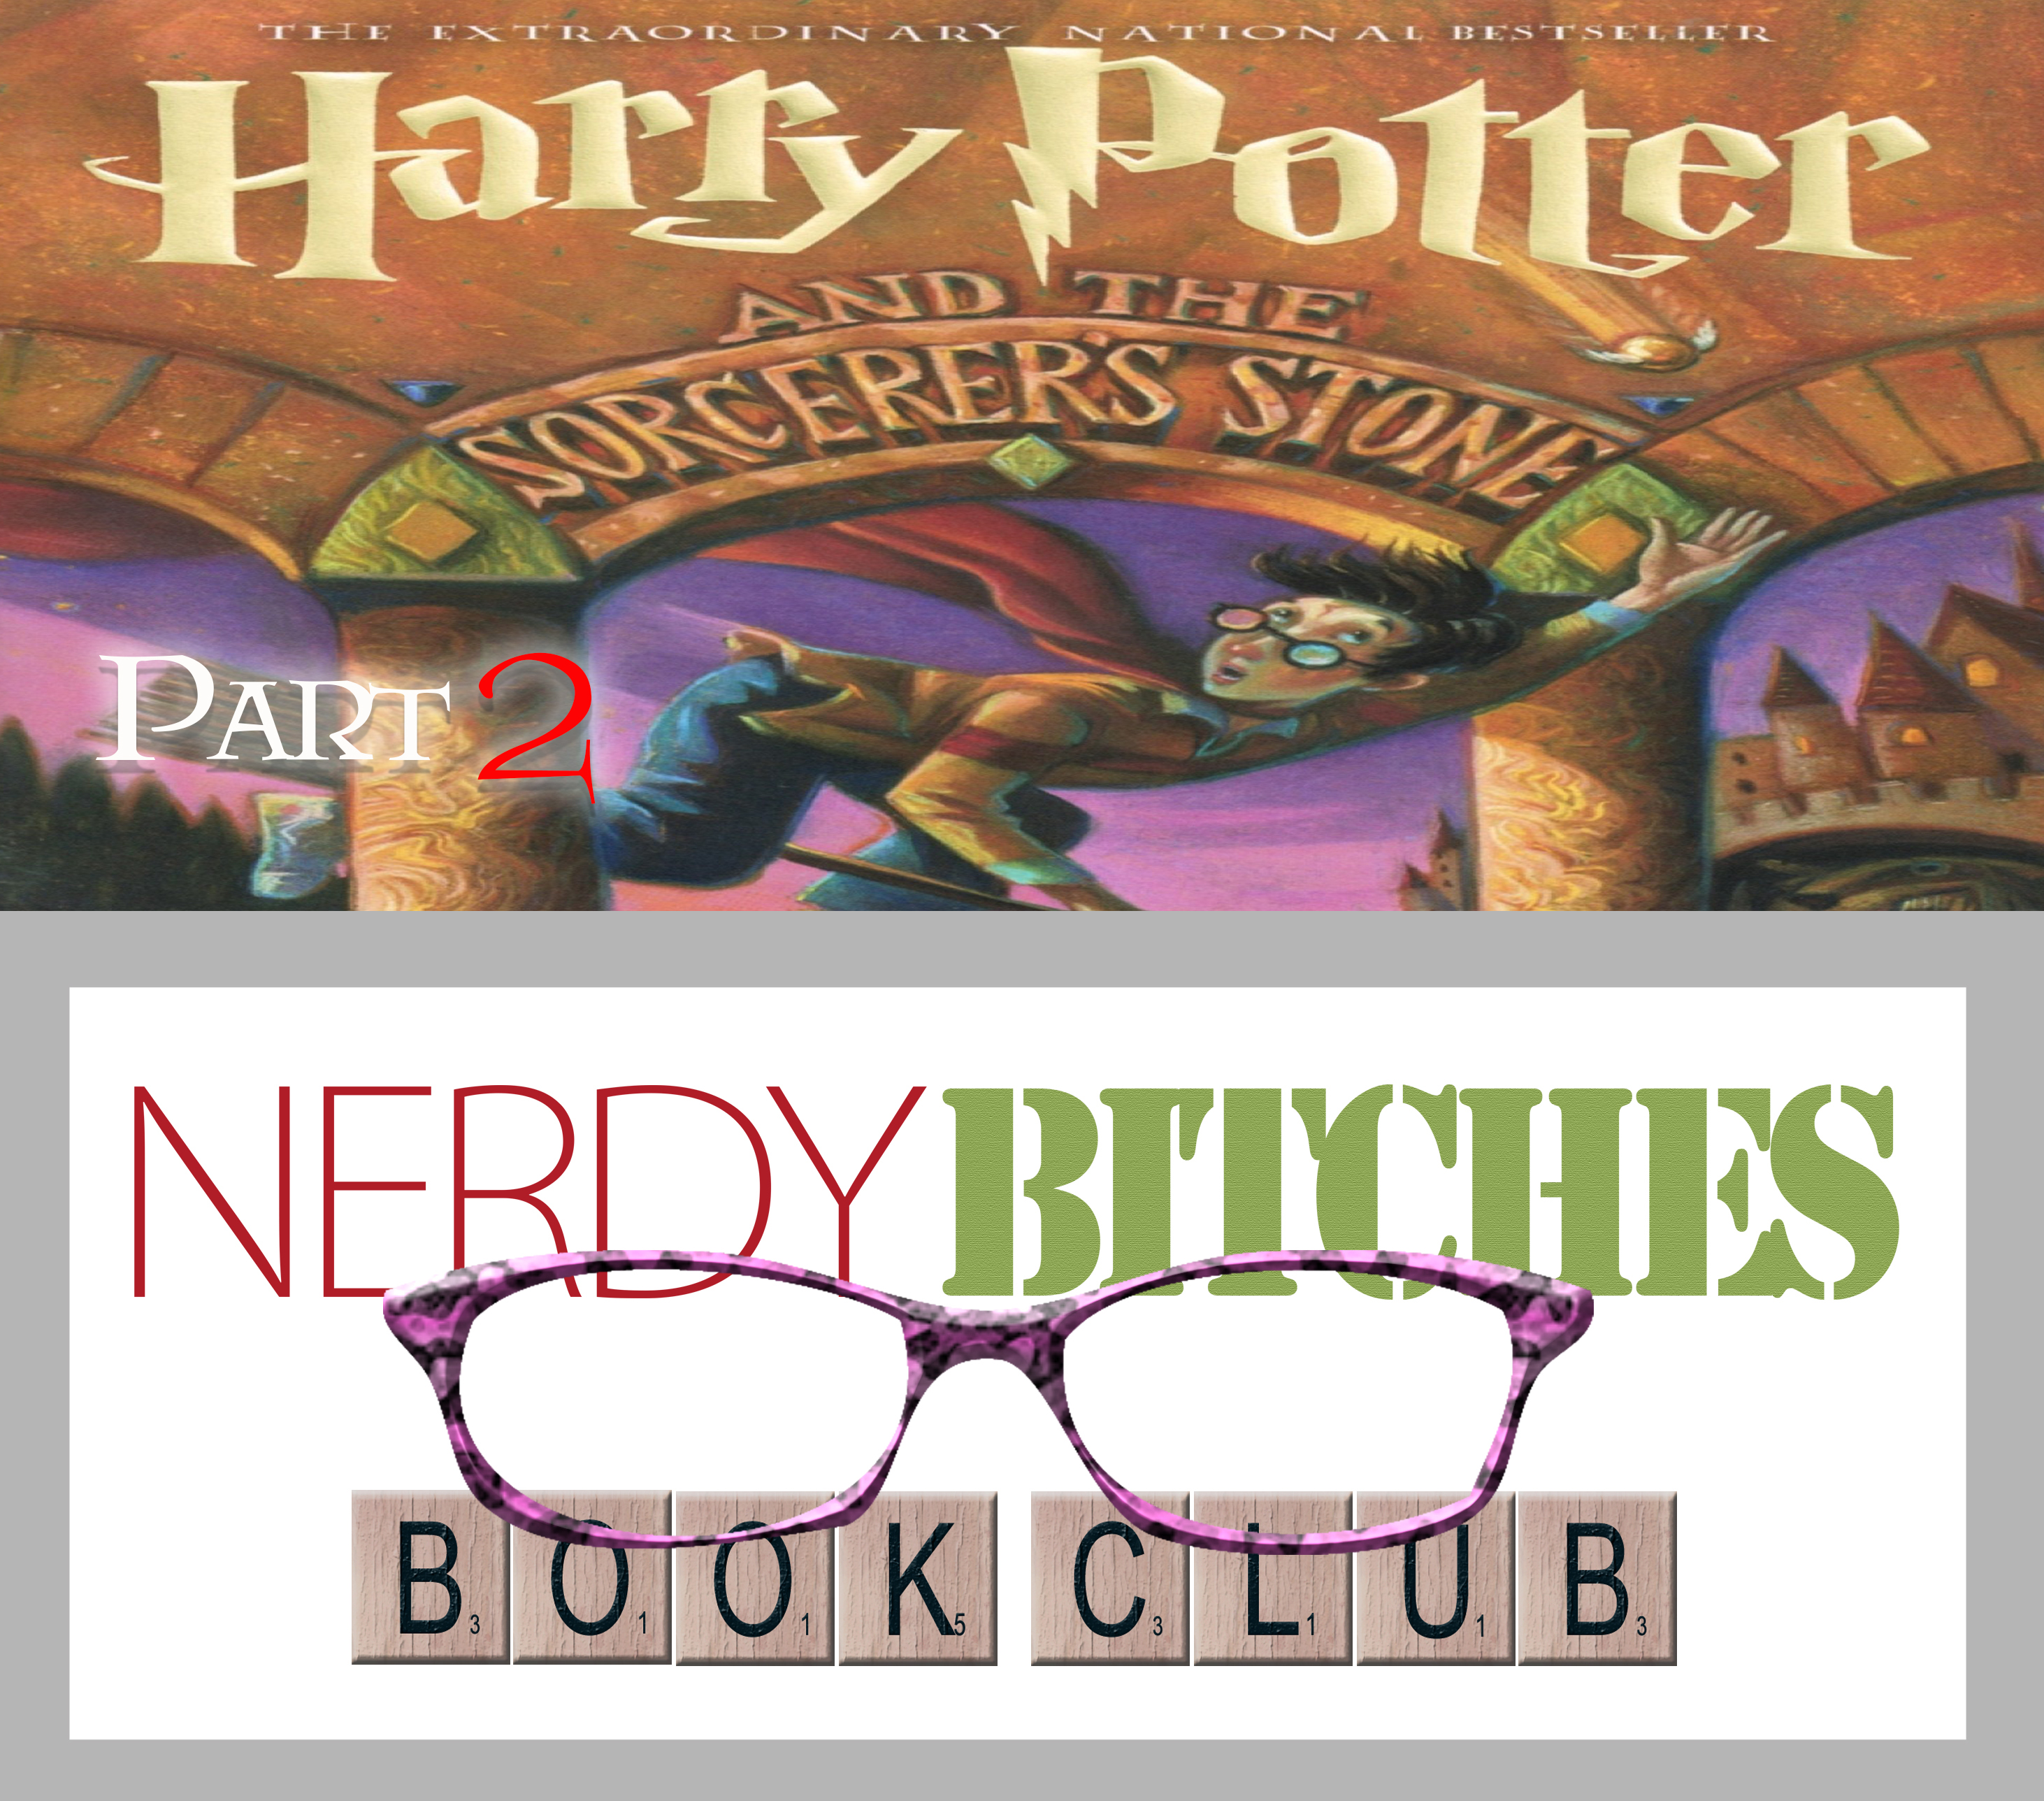 Book Club: Harry Potter and the Sorcerer's Stone Part 2